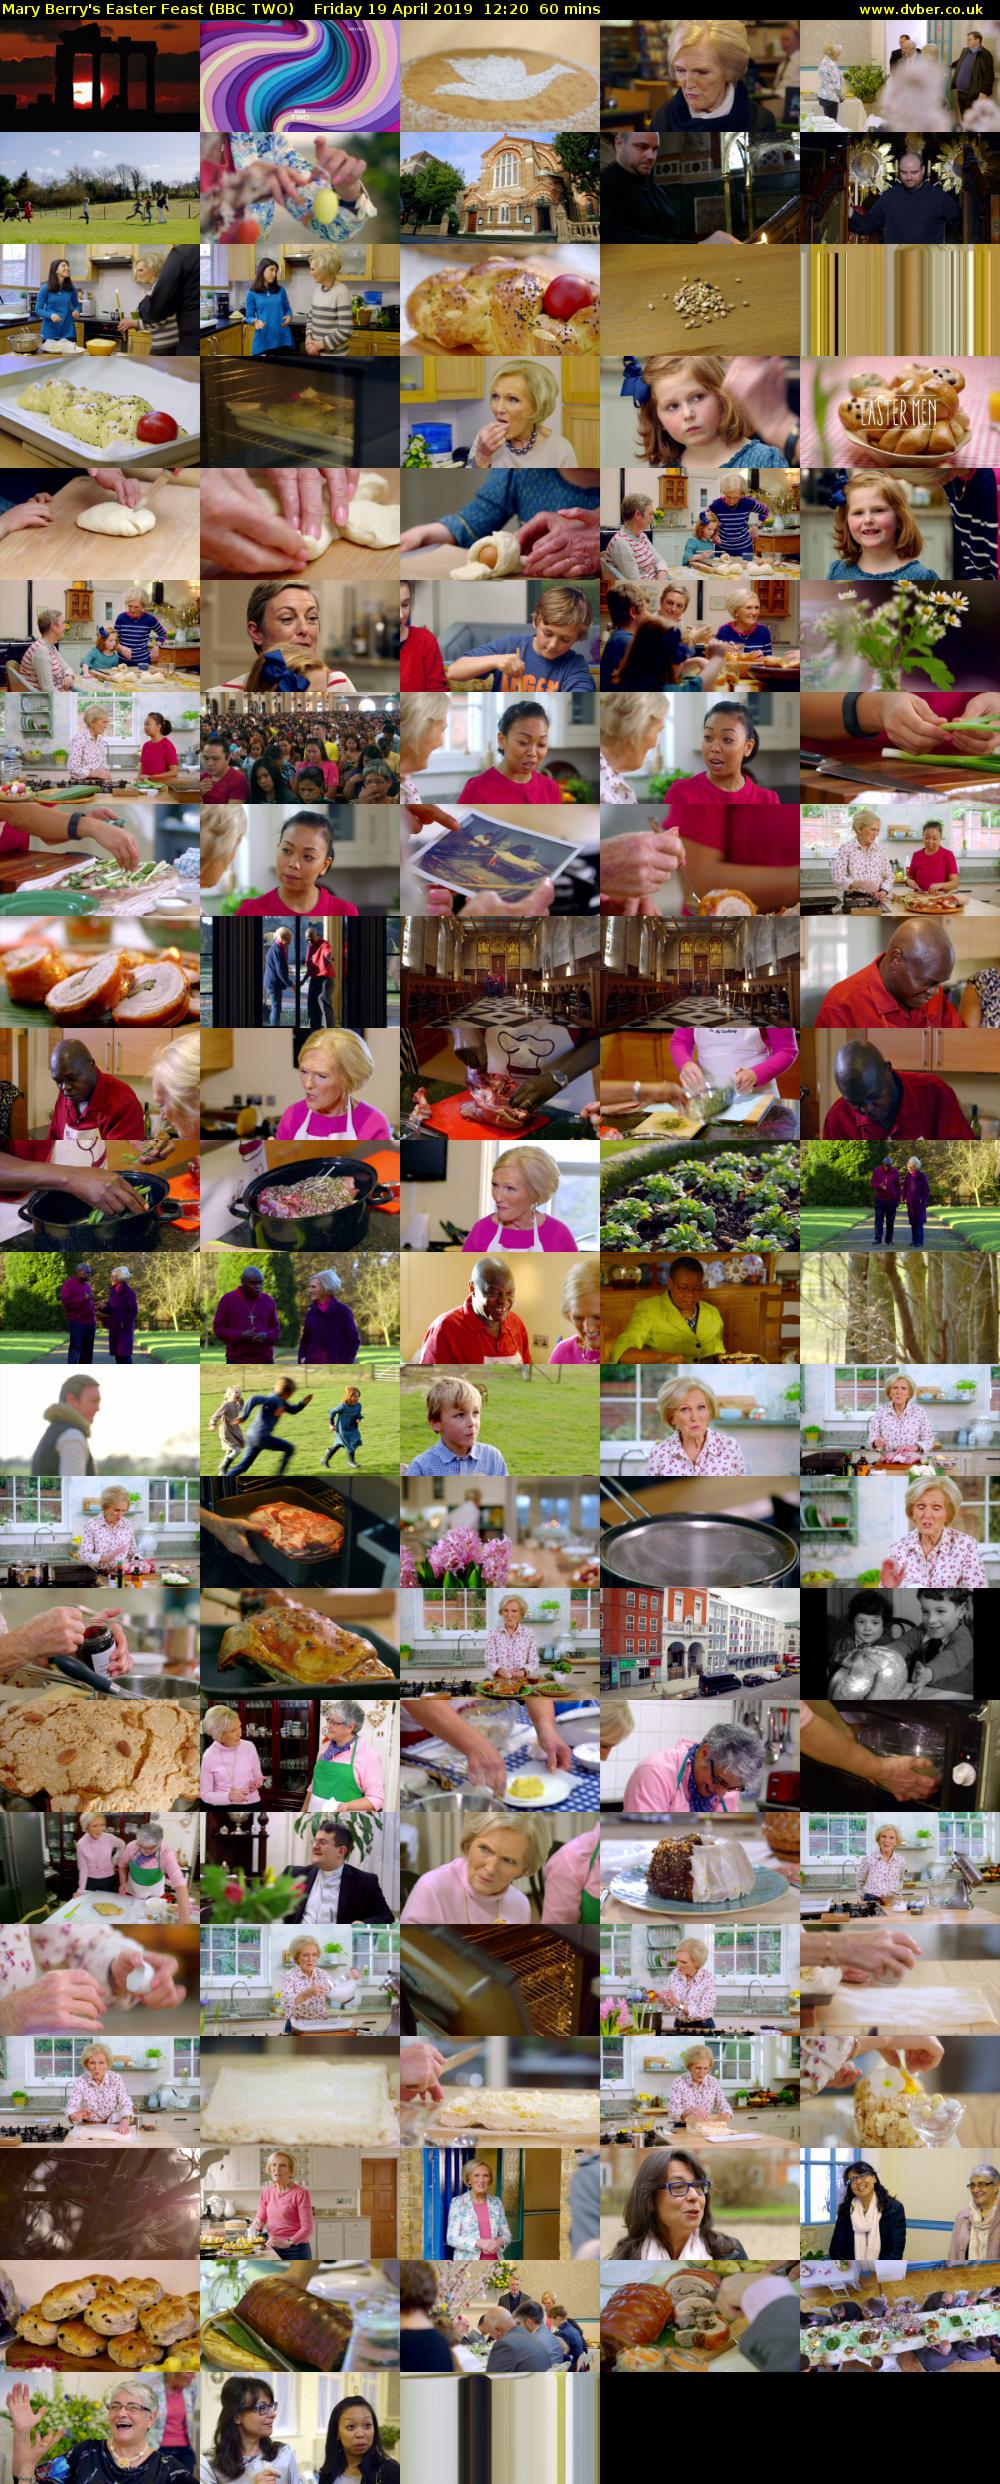 Mary Berry's Easter Feast (BBC TWO) Friday 19 April 2019 12:20 - 13:20